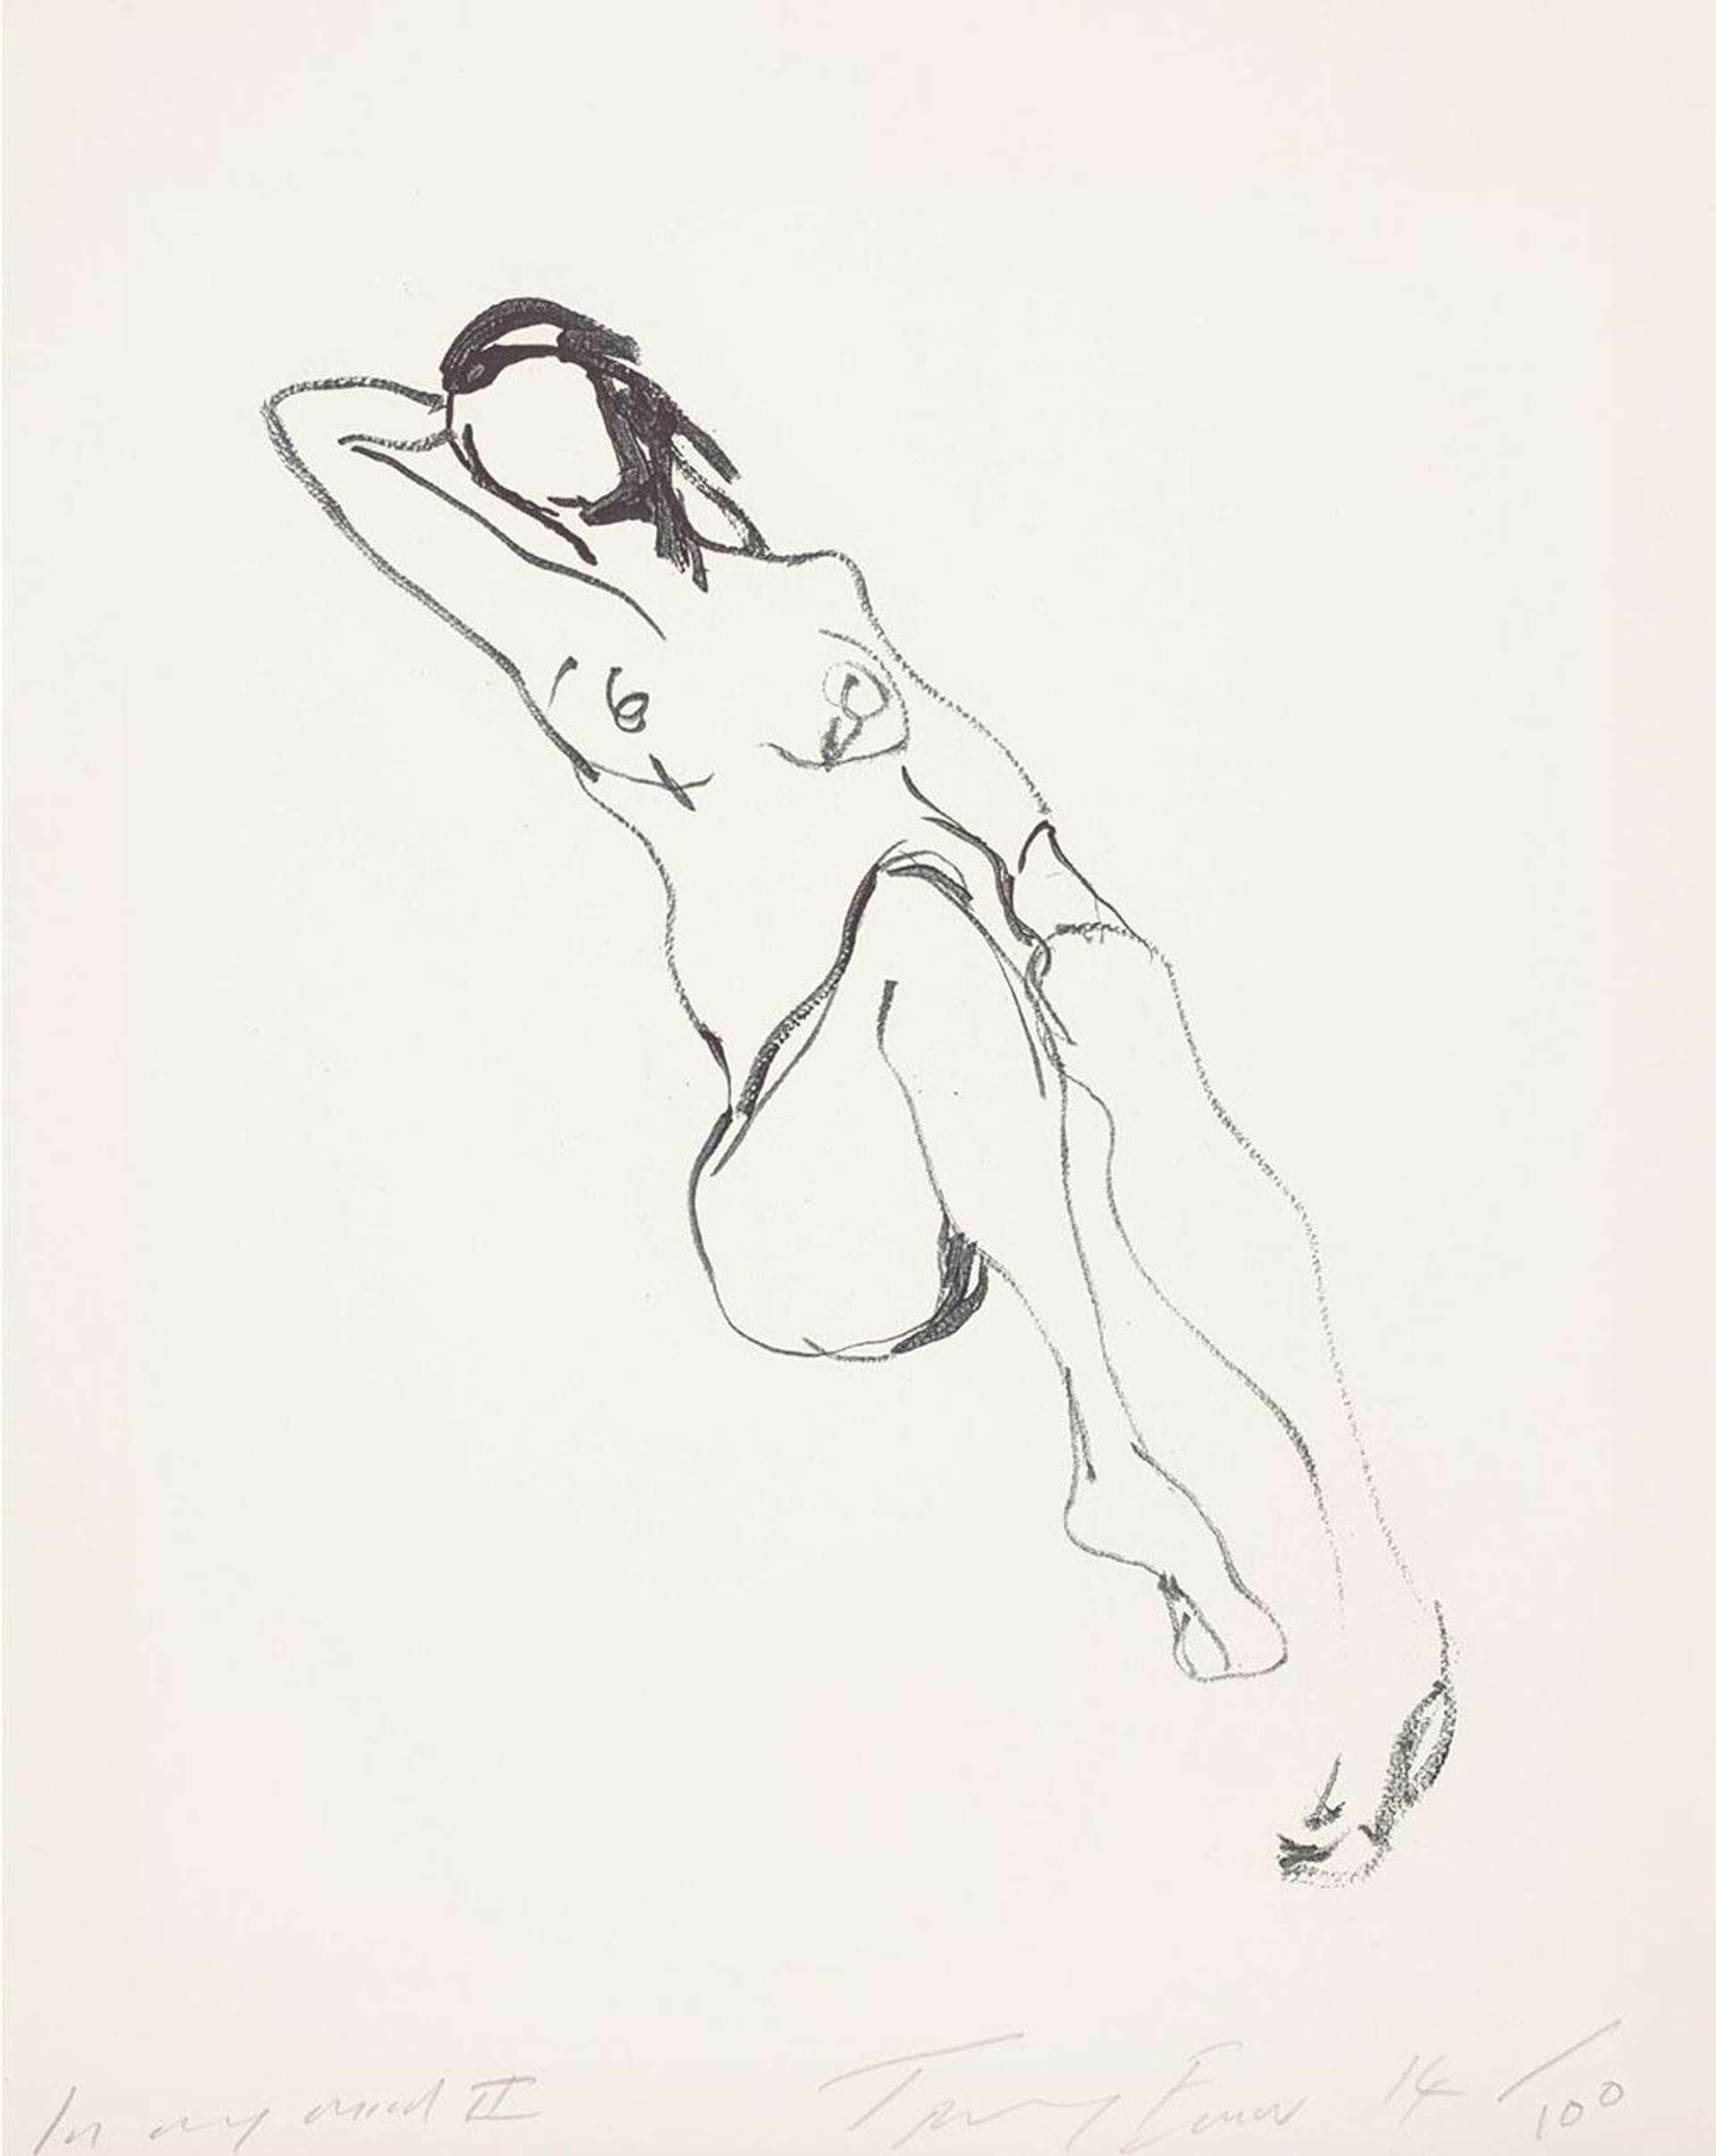 An etching by Tracey Emin portraying a female nude, rendered through Emin’s characteristic rushed and unfinished lines